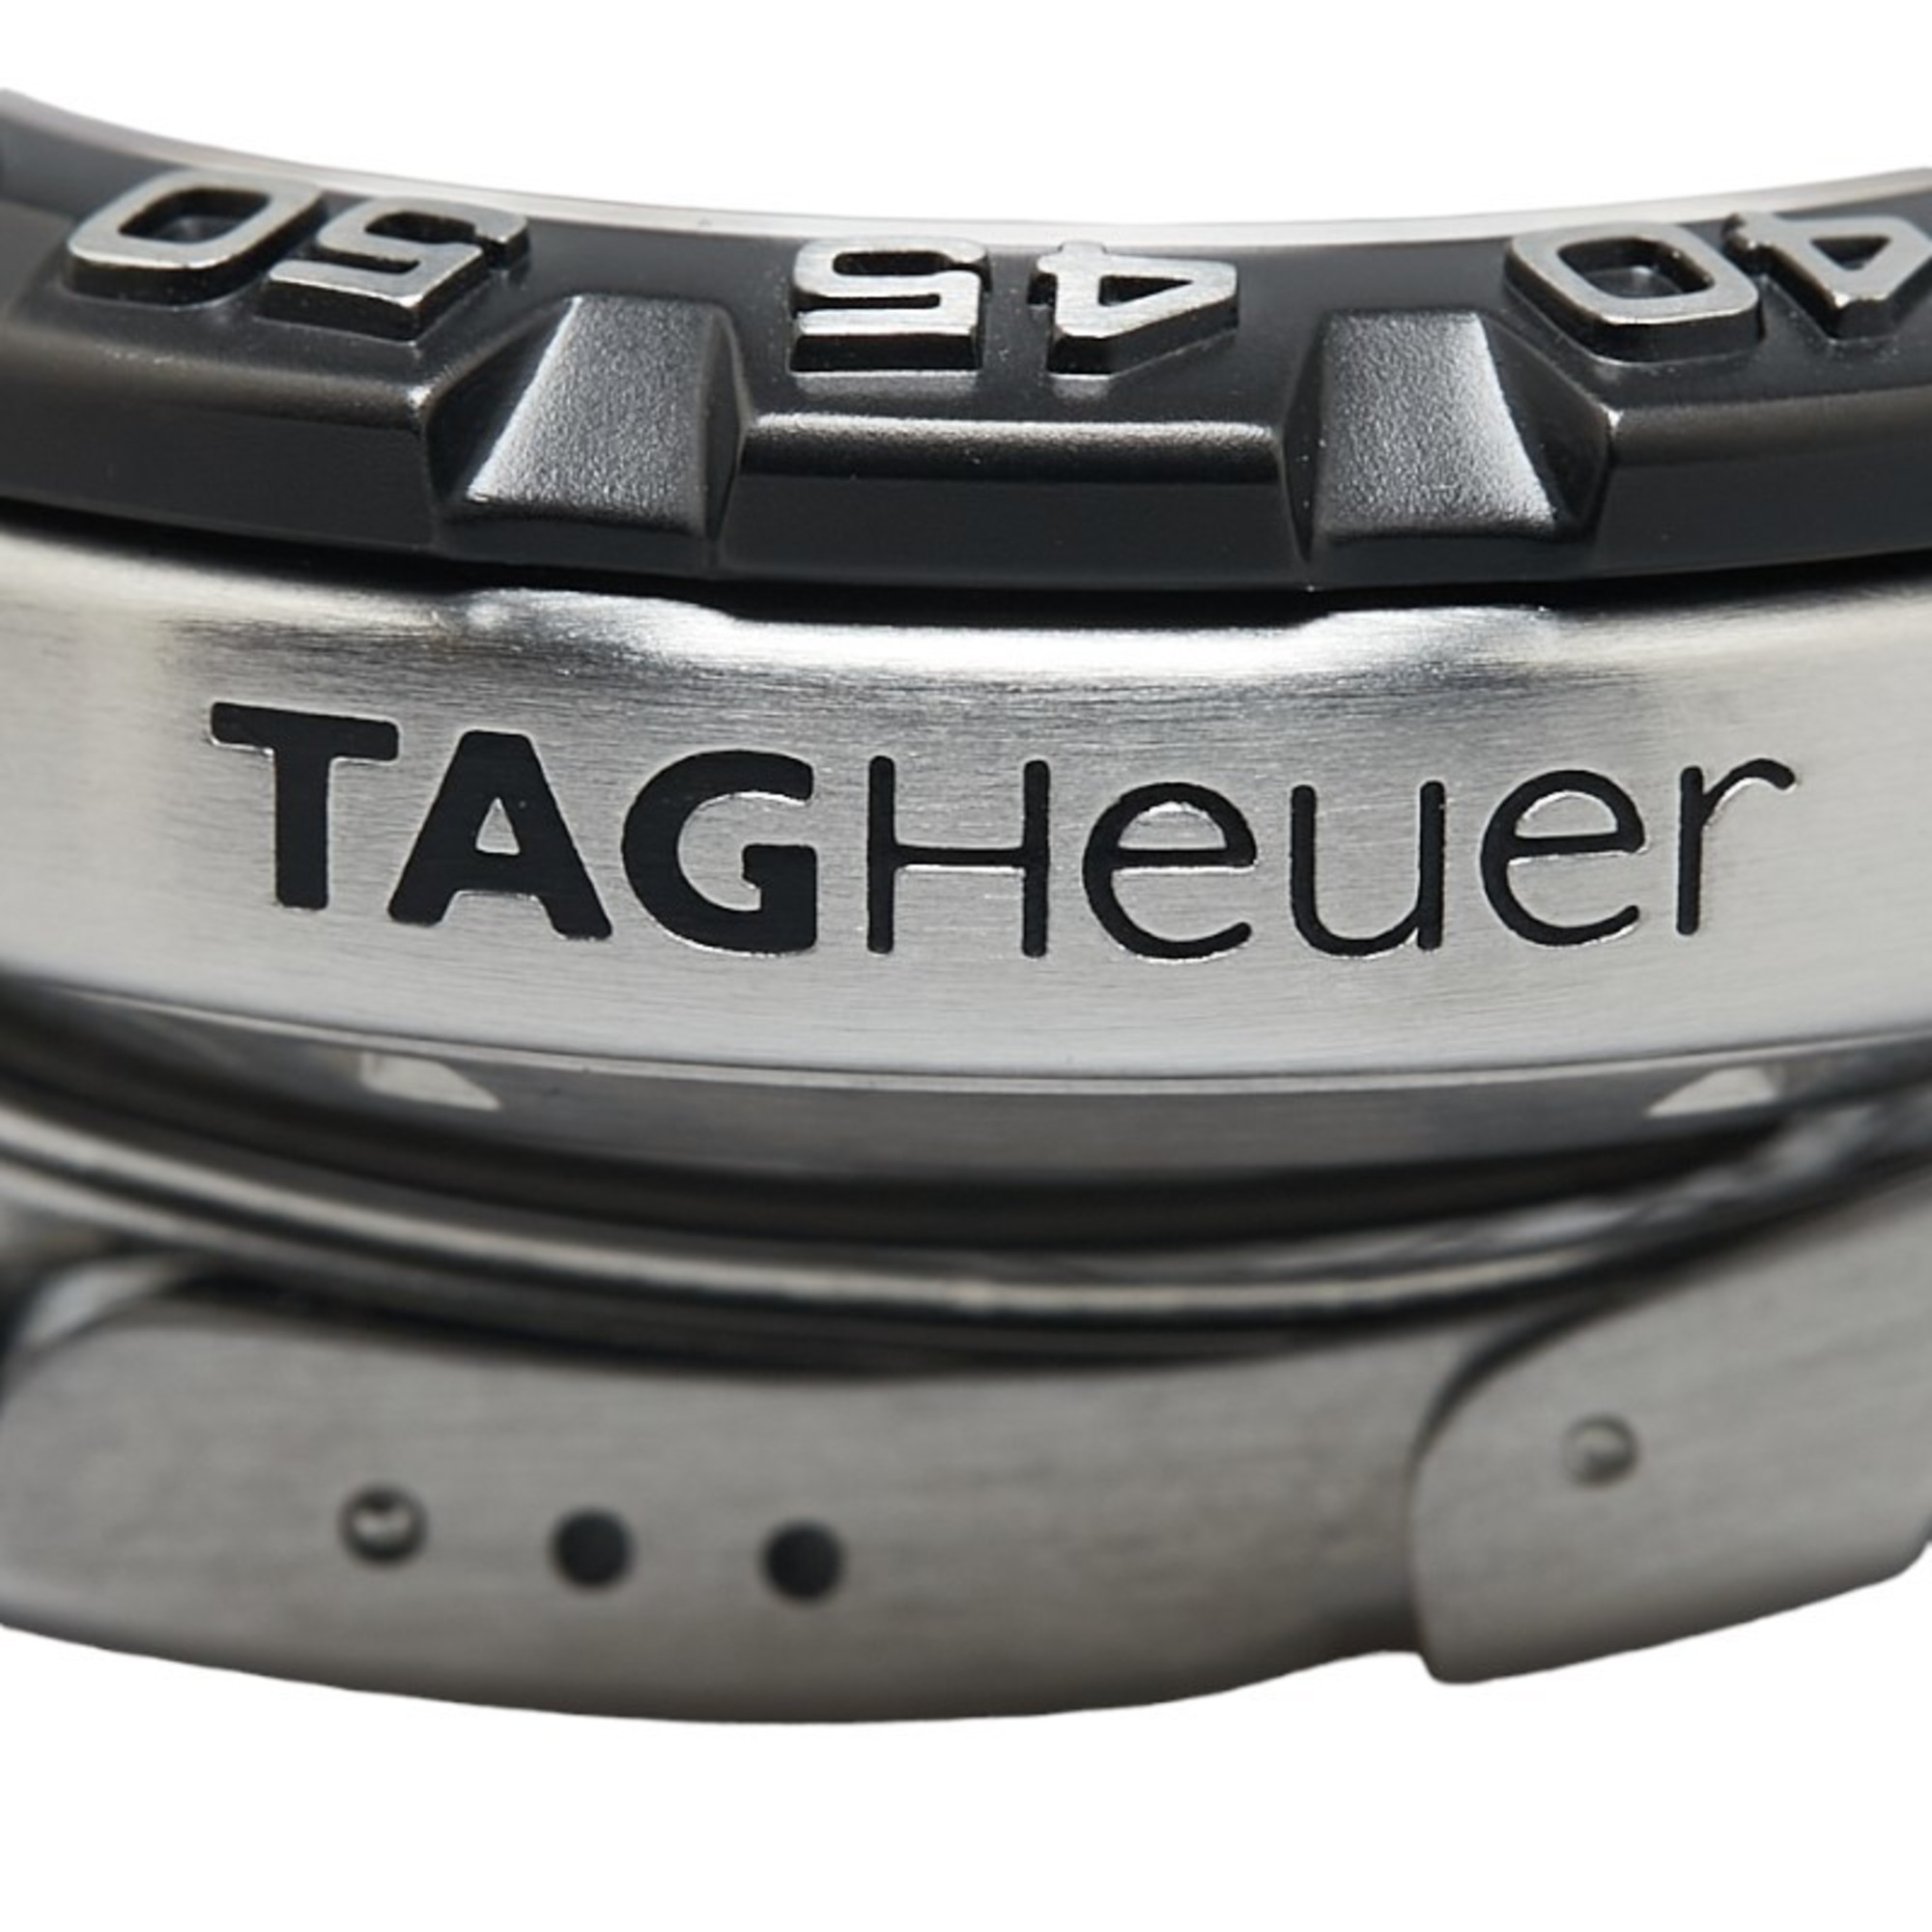 TAG Heuer Formula 1 Watch WAH1111 Quartz White Dial Stainless Steel Rubber Men's HEUER